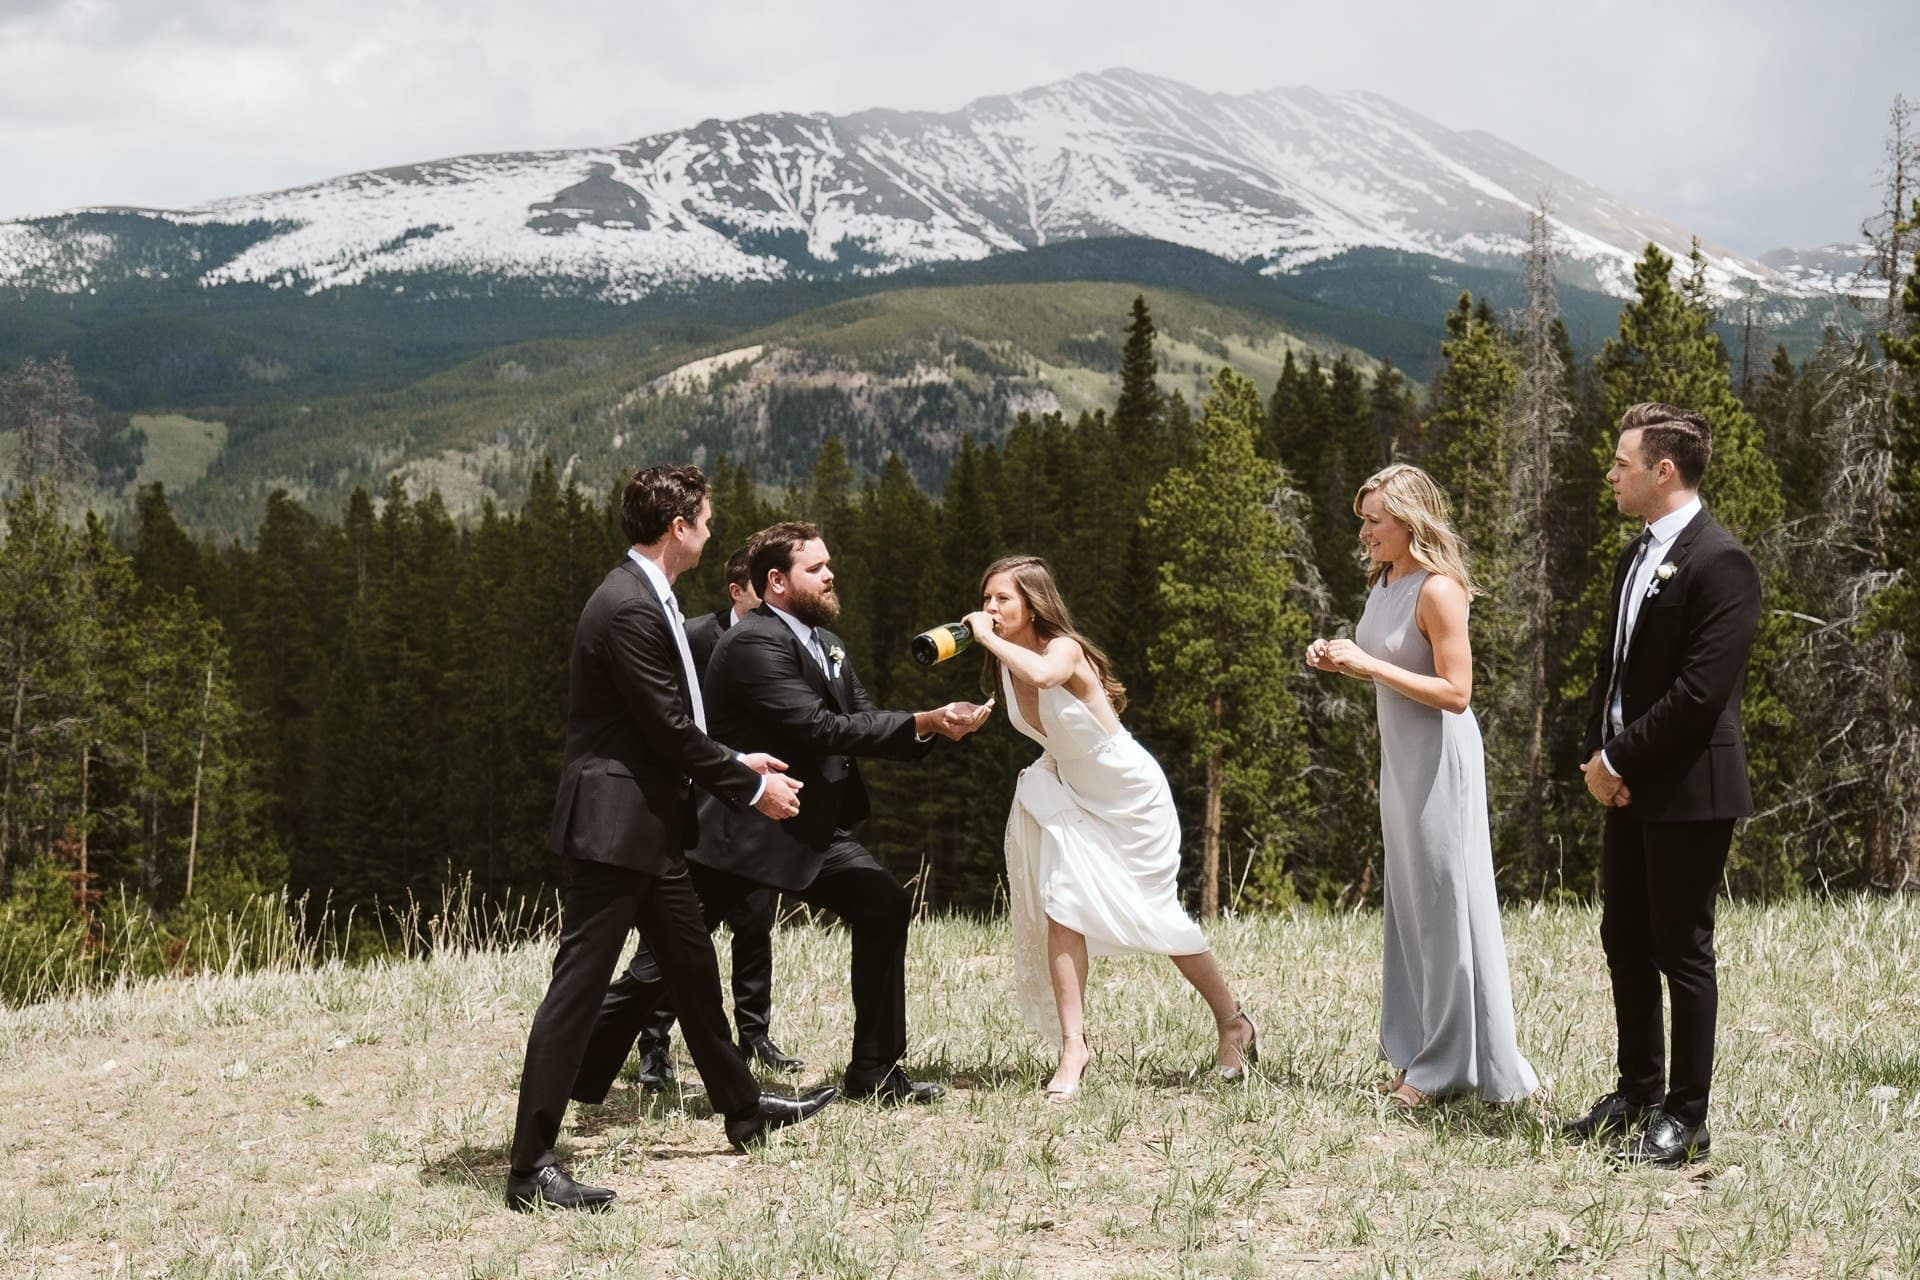 Bride and groom popping champagne with wedding party at Ten Mile Station, Breckenridge ski resort wedding, Colorado mountain wedding photographer